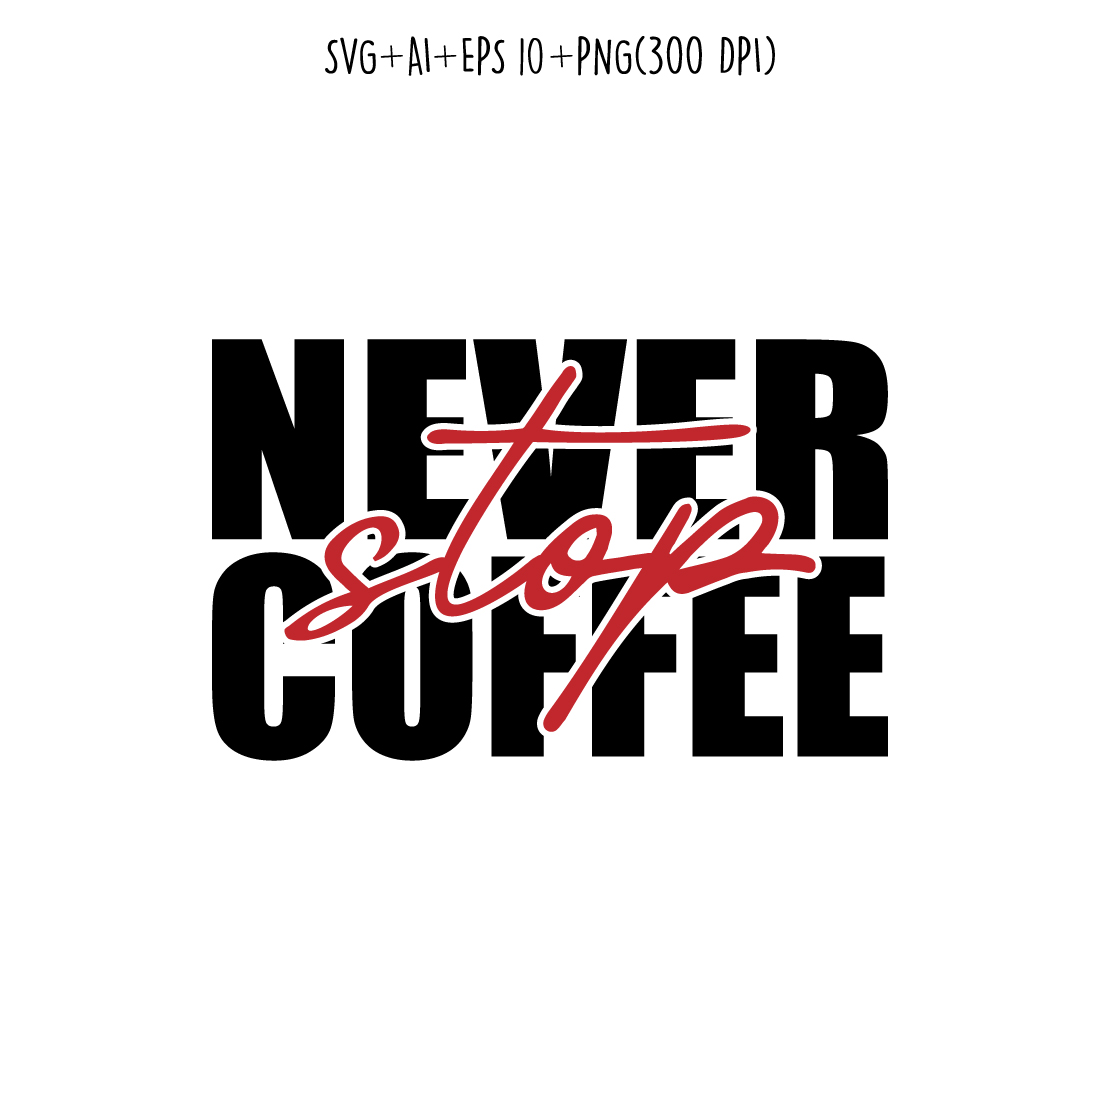 Never stop coffee coffee typography design for t-shirts, print, templates, logos, mug preview image.